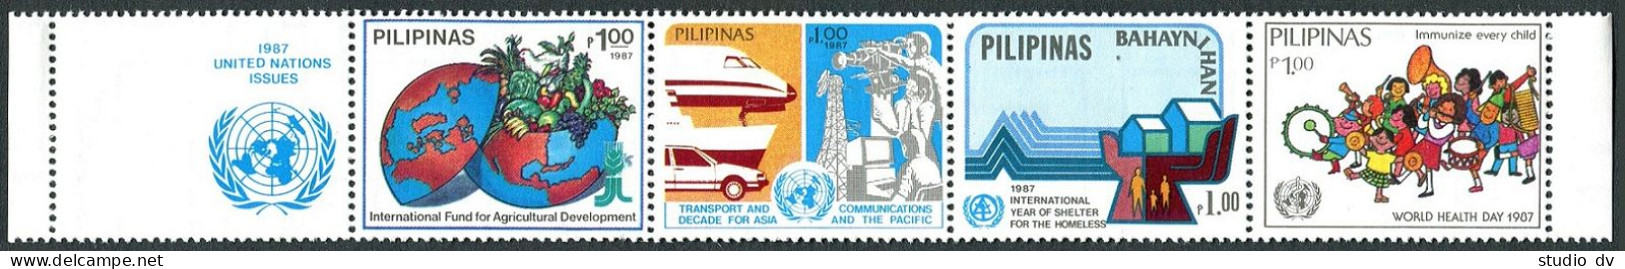 Philippines 1907 Ad Perf & Imperf  Strips, MNH. UN Projects 1987. FAO, IYSH-1987 - Philippinen